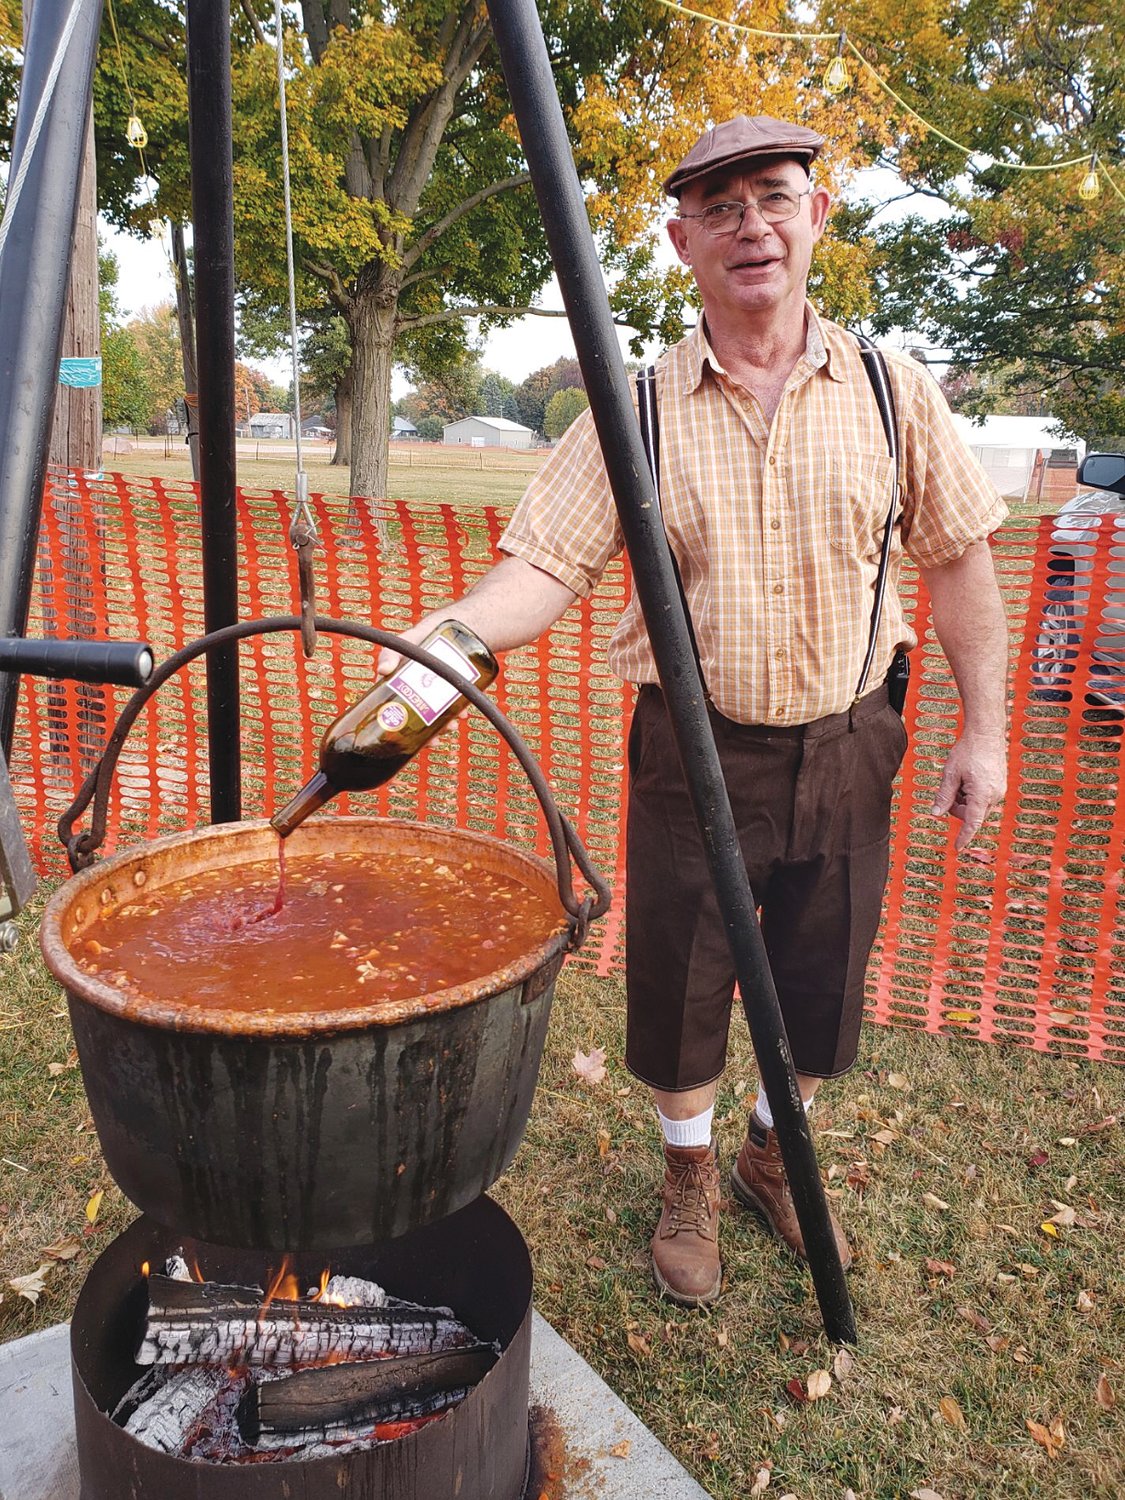 Phil Pirtle cooks goulash over a fire during Oktoberfest 2020 at the Waynetown Park.